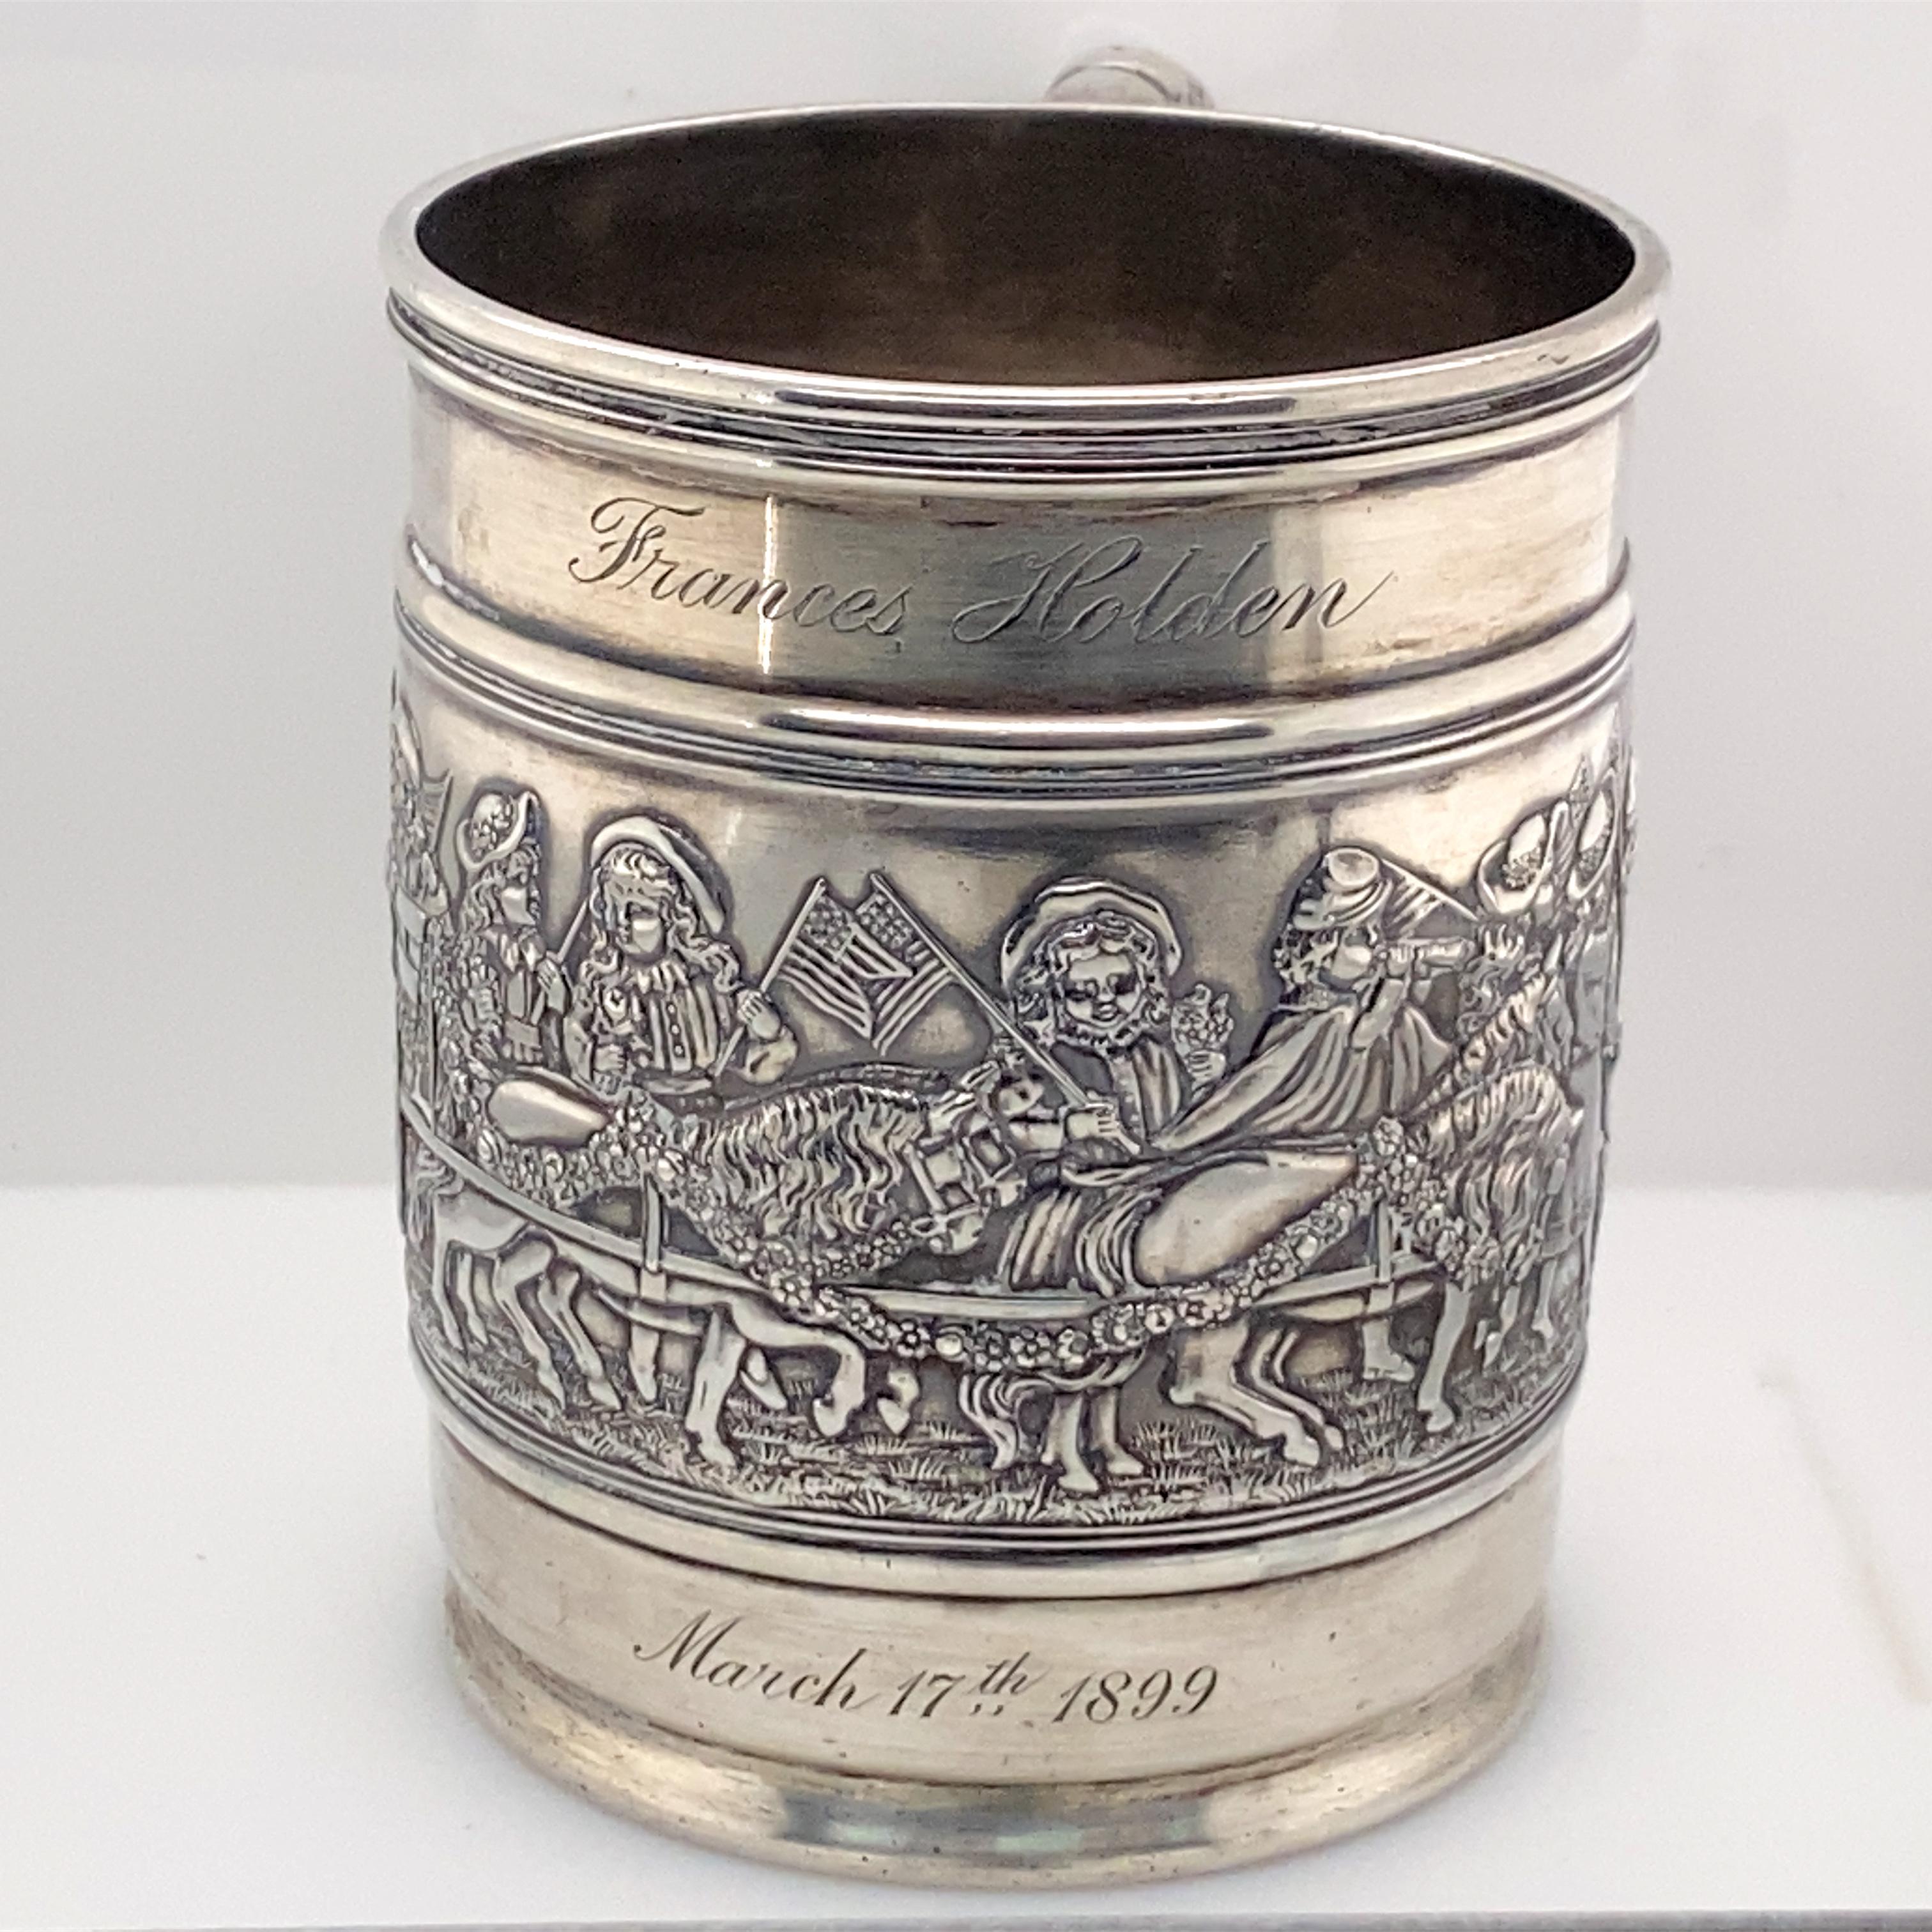 Tiffany & Co. sterling silver child's cup with patriotic parade scene. 1899. Embossed children waving flags, riding in horse-drawn wagon, and some wearing Civil War uniforms. Ribbed handle with dent. Worn marks for Tiffany & Co. to underside.